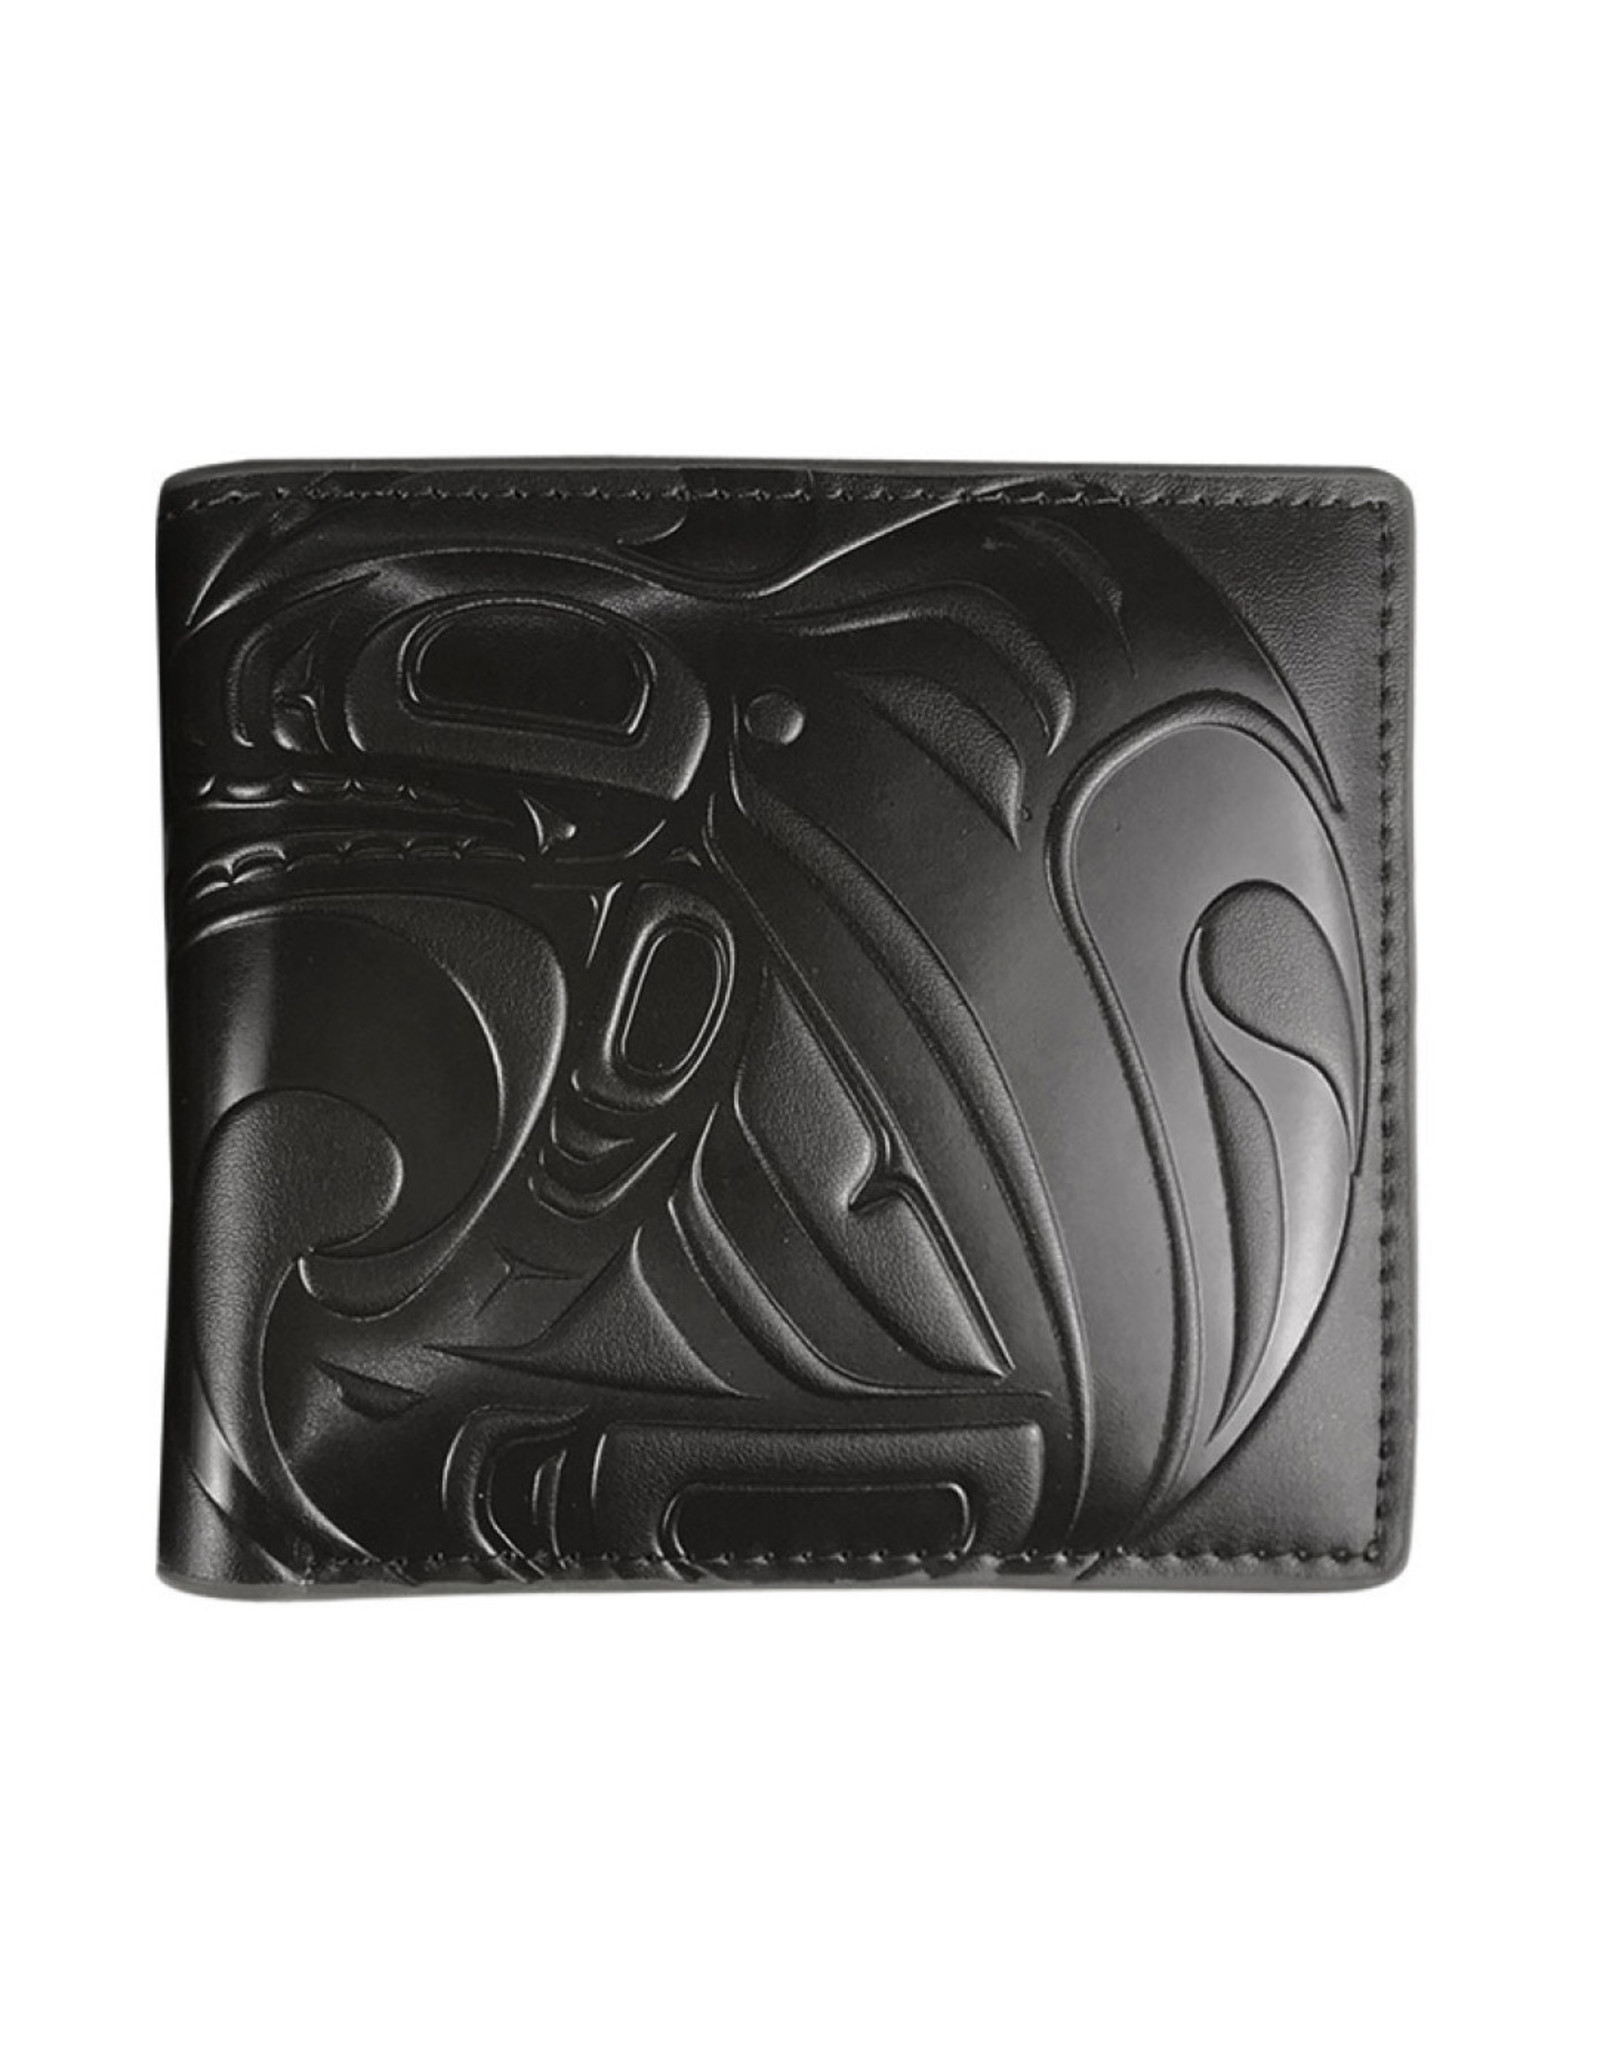 Leather Embossed Wallet  by Trevor Angus - Killer Whale -  EFW15